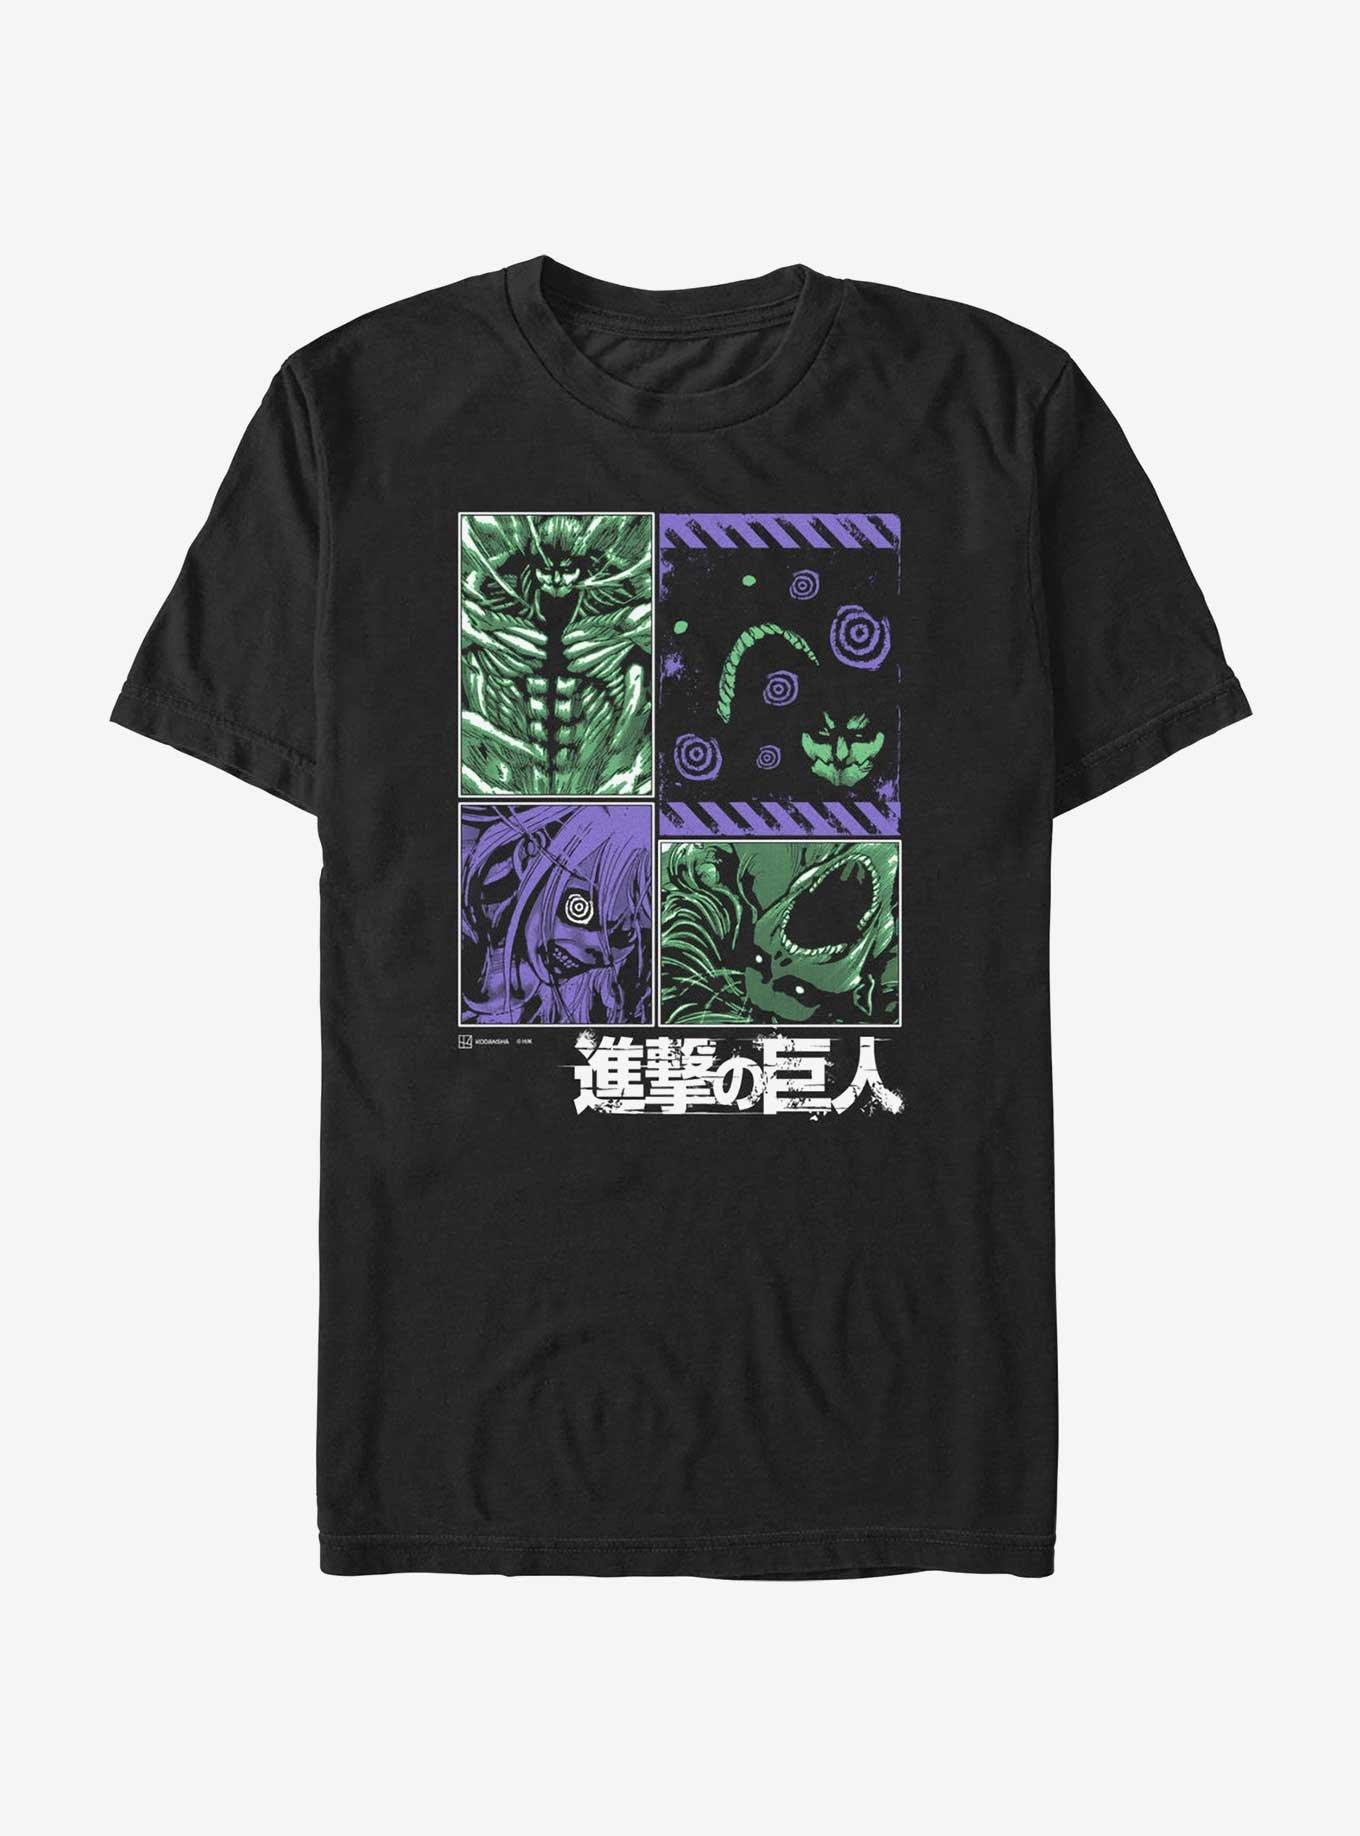 Attack on Titan Armored Founding and Titans T-Shirt